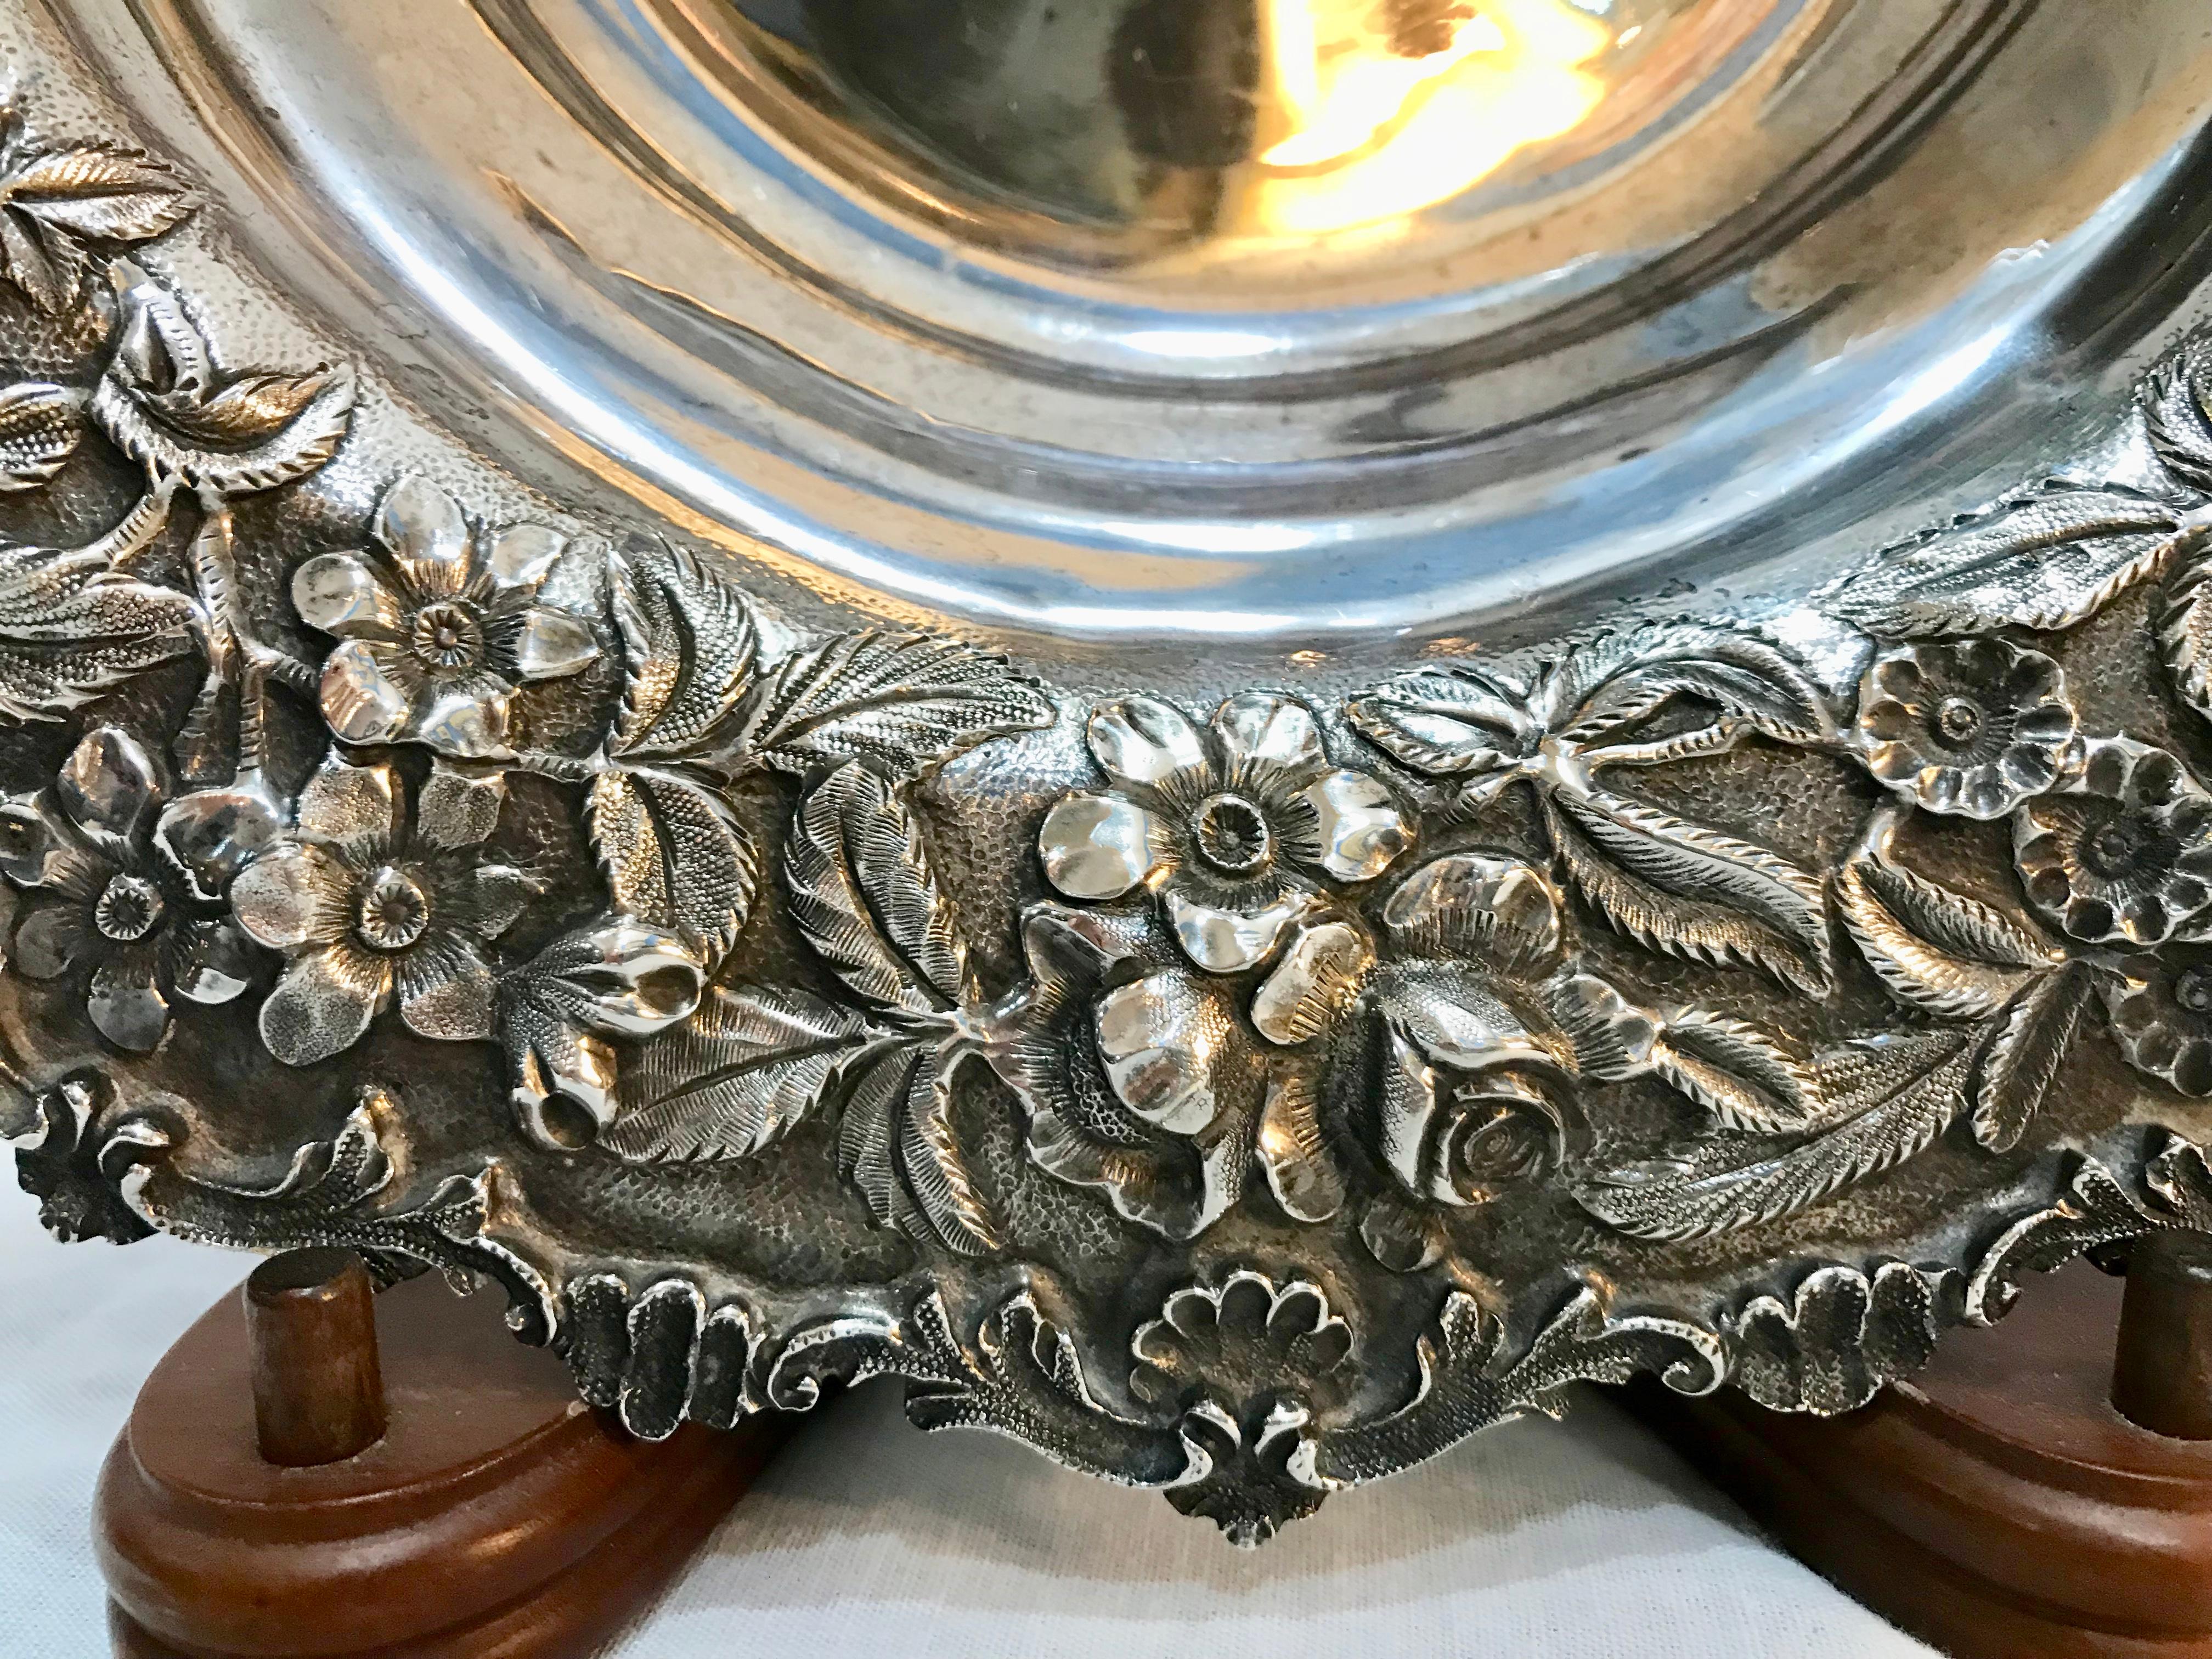 American S Kirk & Sons Repousse Sterling Silver Center Bowl